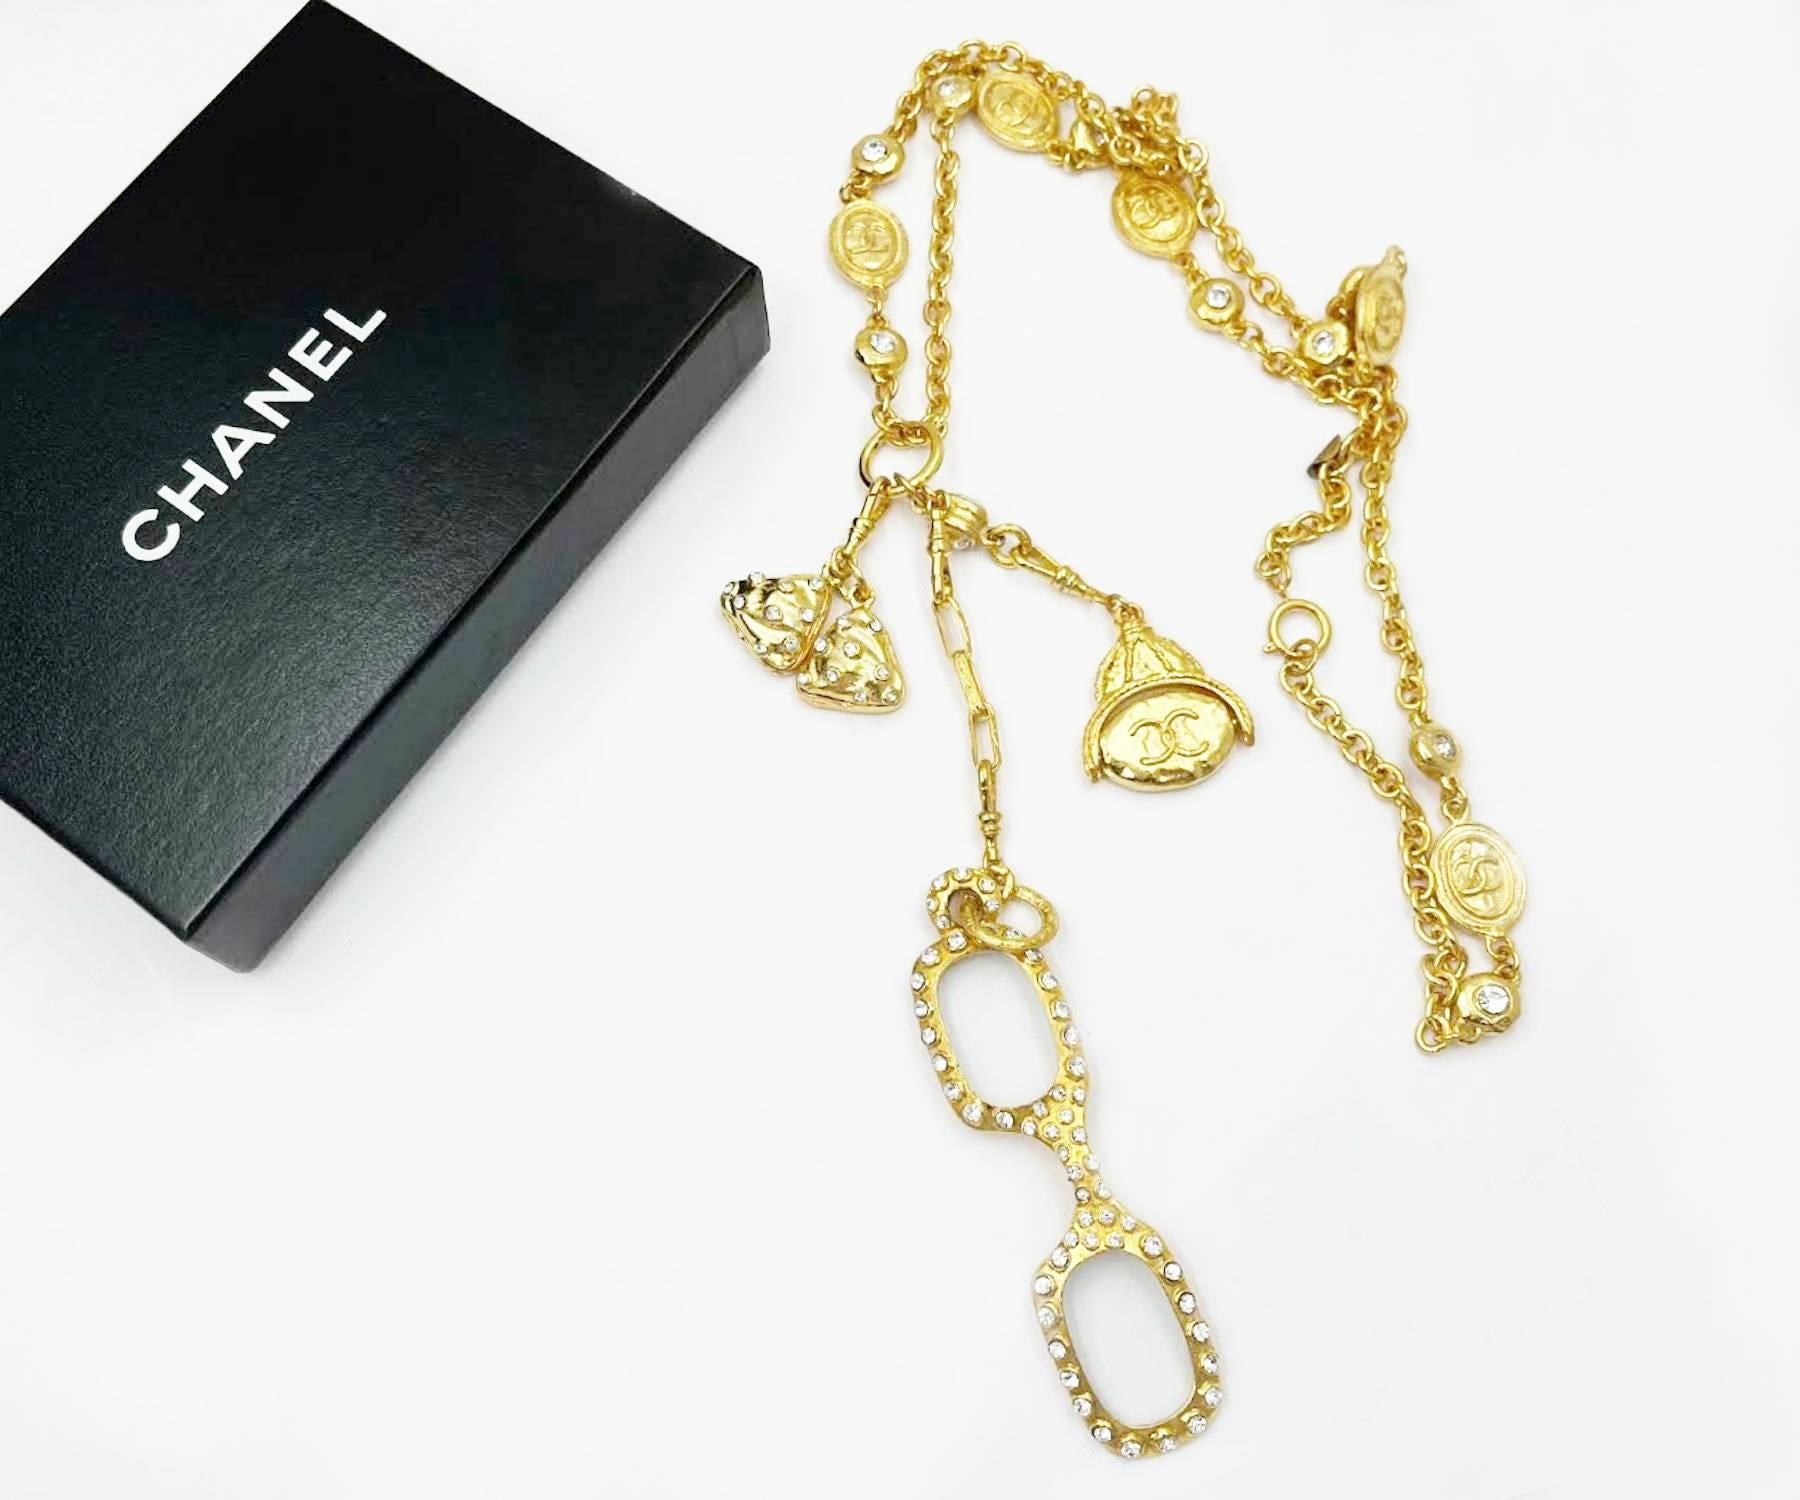 Chanel Vintage Gold Plated CC Coin 3 Charm Magnifying Glasses Long Necklace

* Marked Chanel
* Made in France
* Comes with the original box

-It is approximately 34″ long. The longest charm is 7″ long. The magnifying glasses are 3.5″ x 1″.
-The